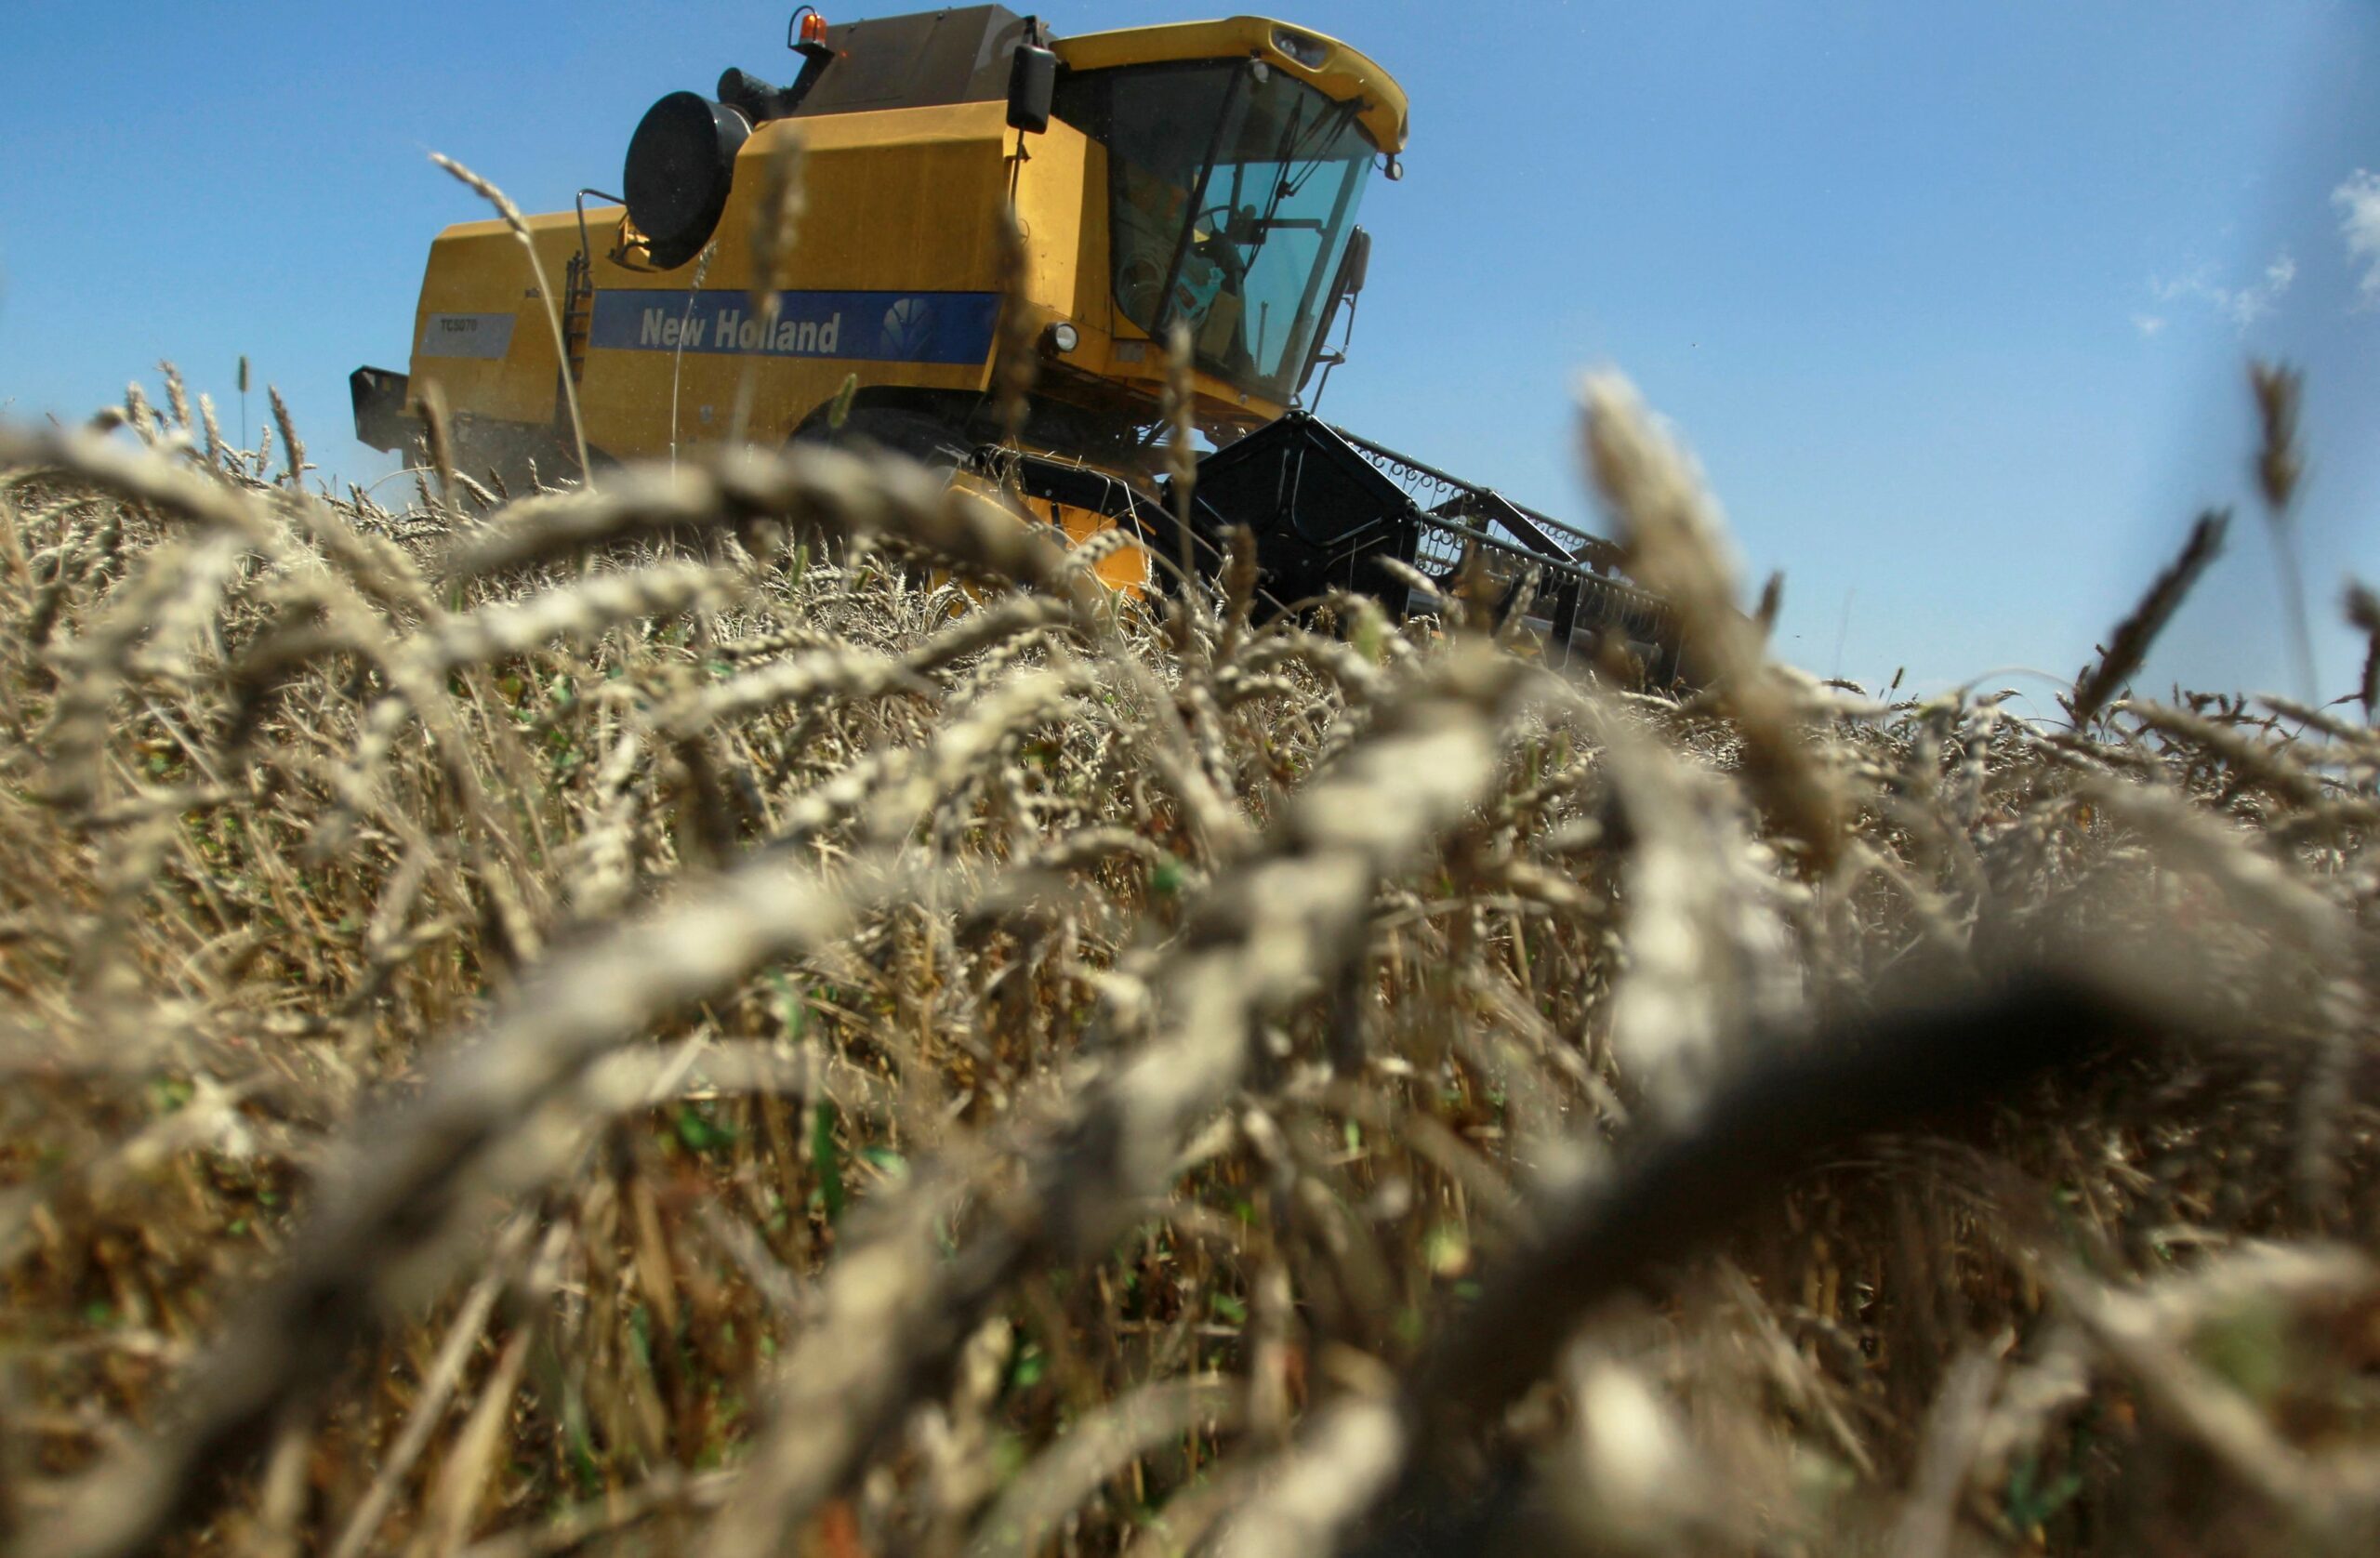 Wheat hits 14-year highs as Russia-Ukraine conflict curbs supply